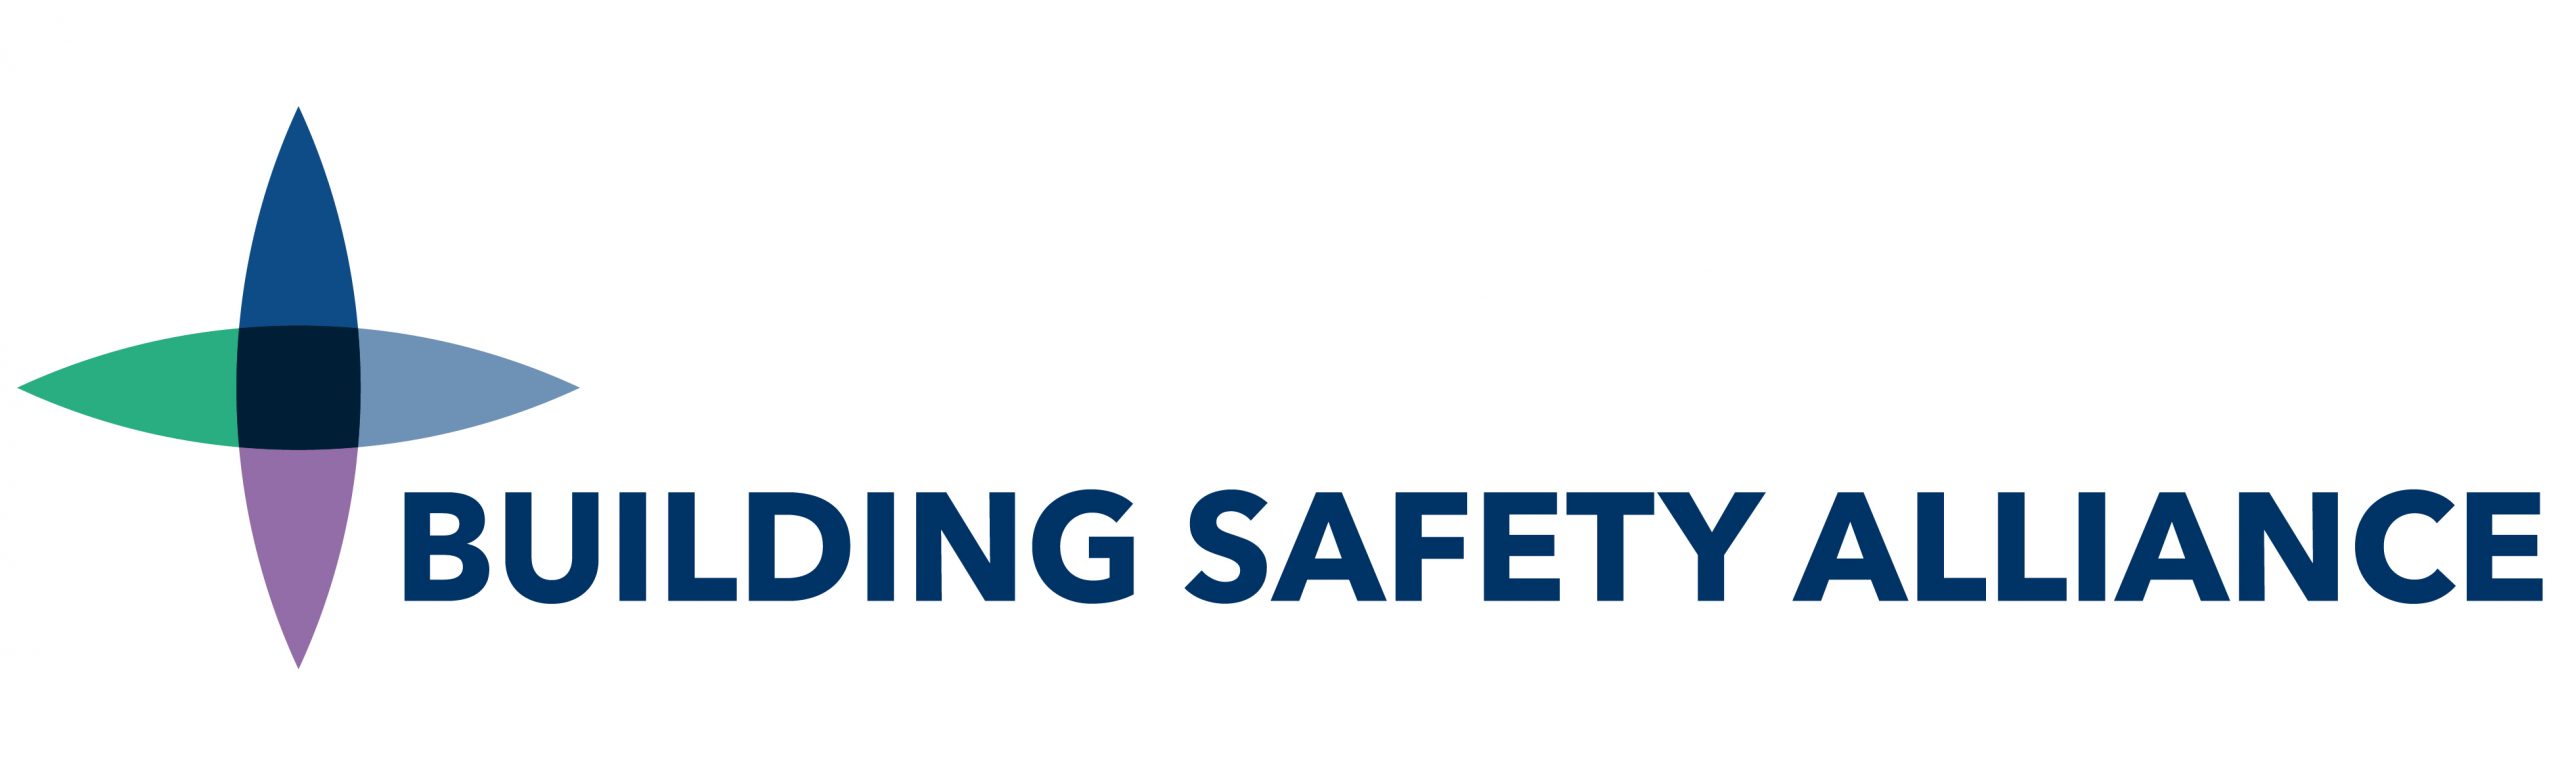 What does the Building Safety Alliance do for you?